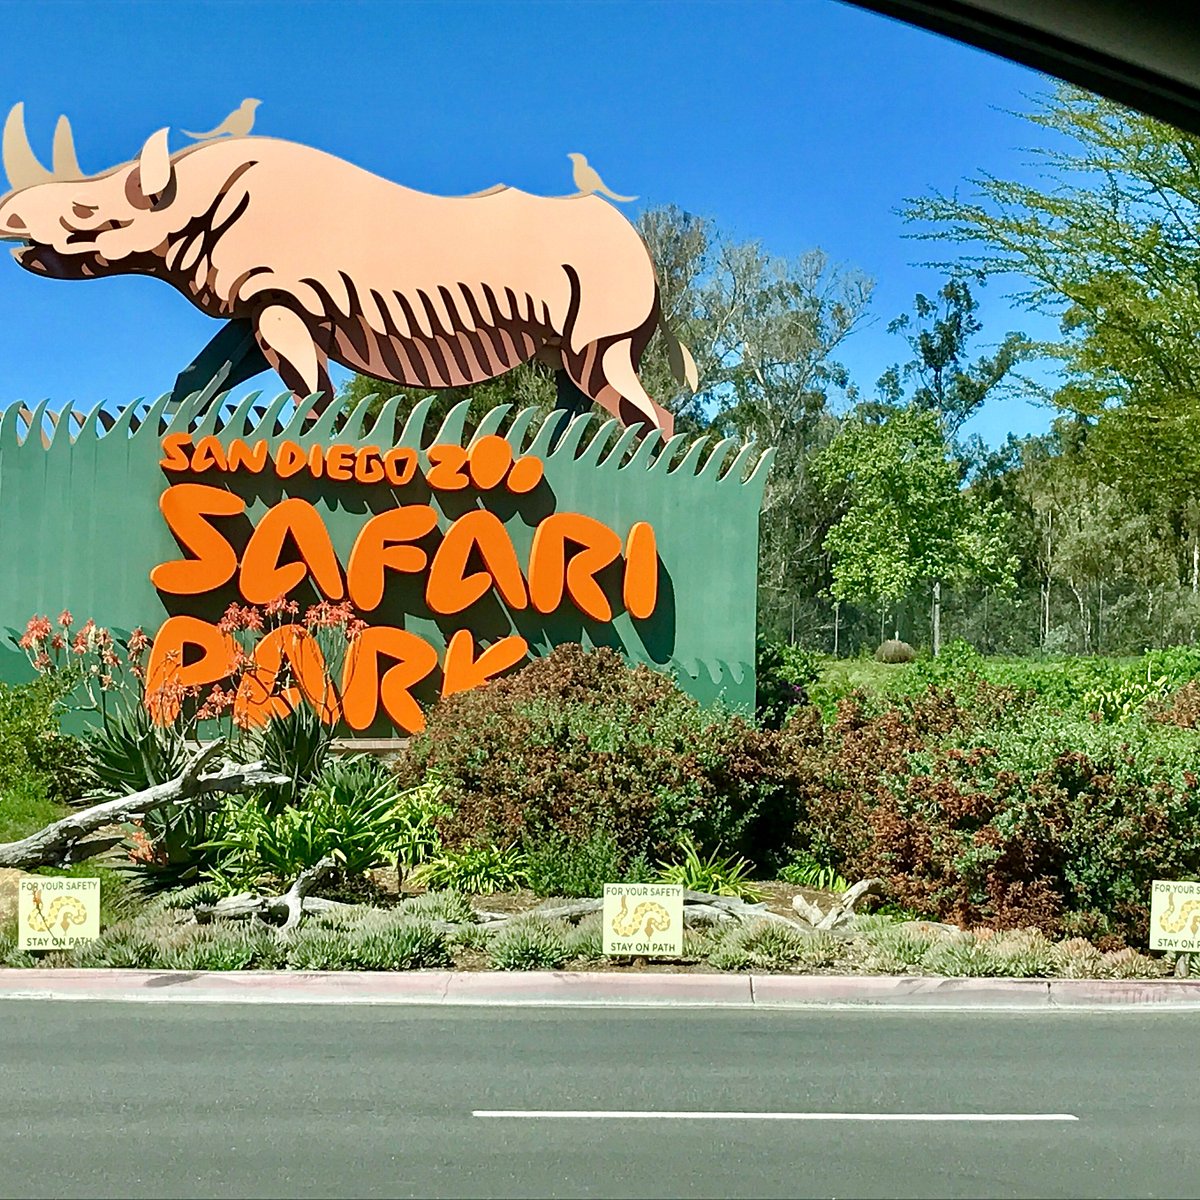 places to visit near san diego zoo